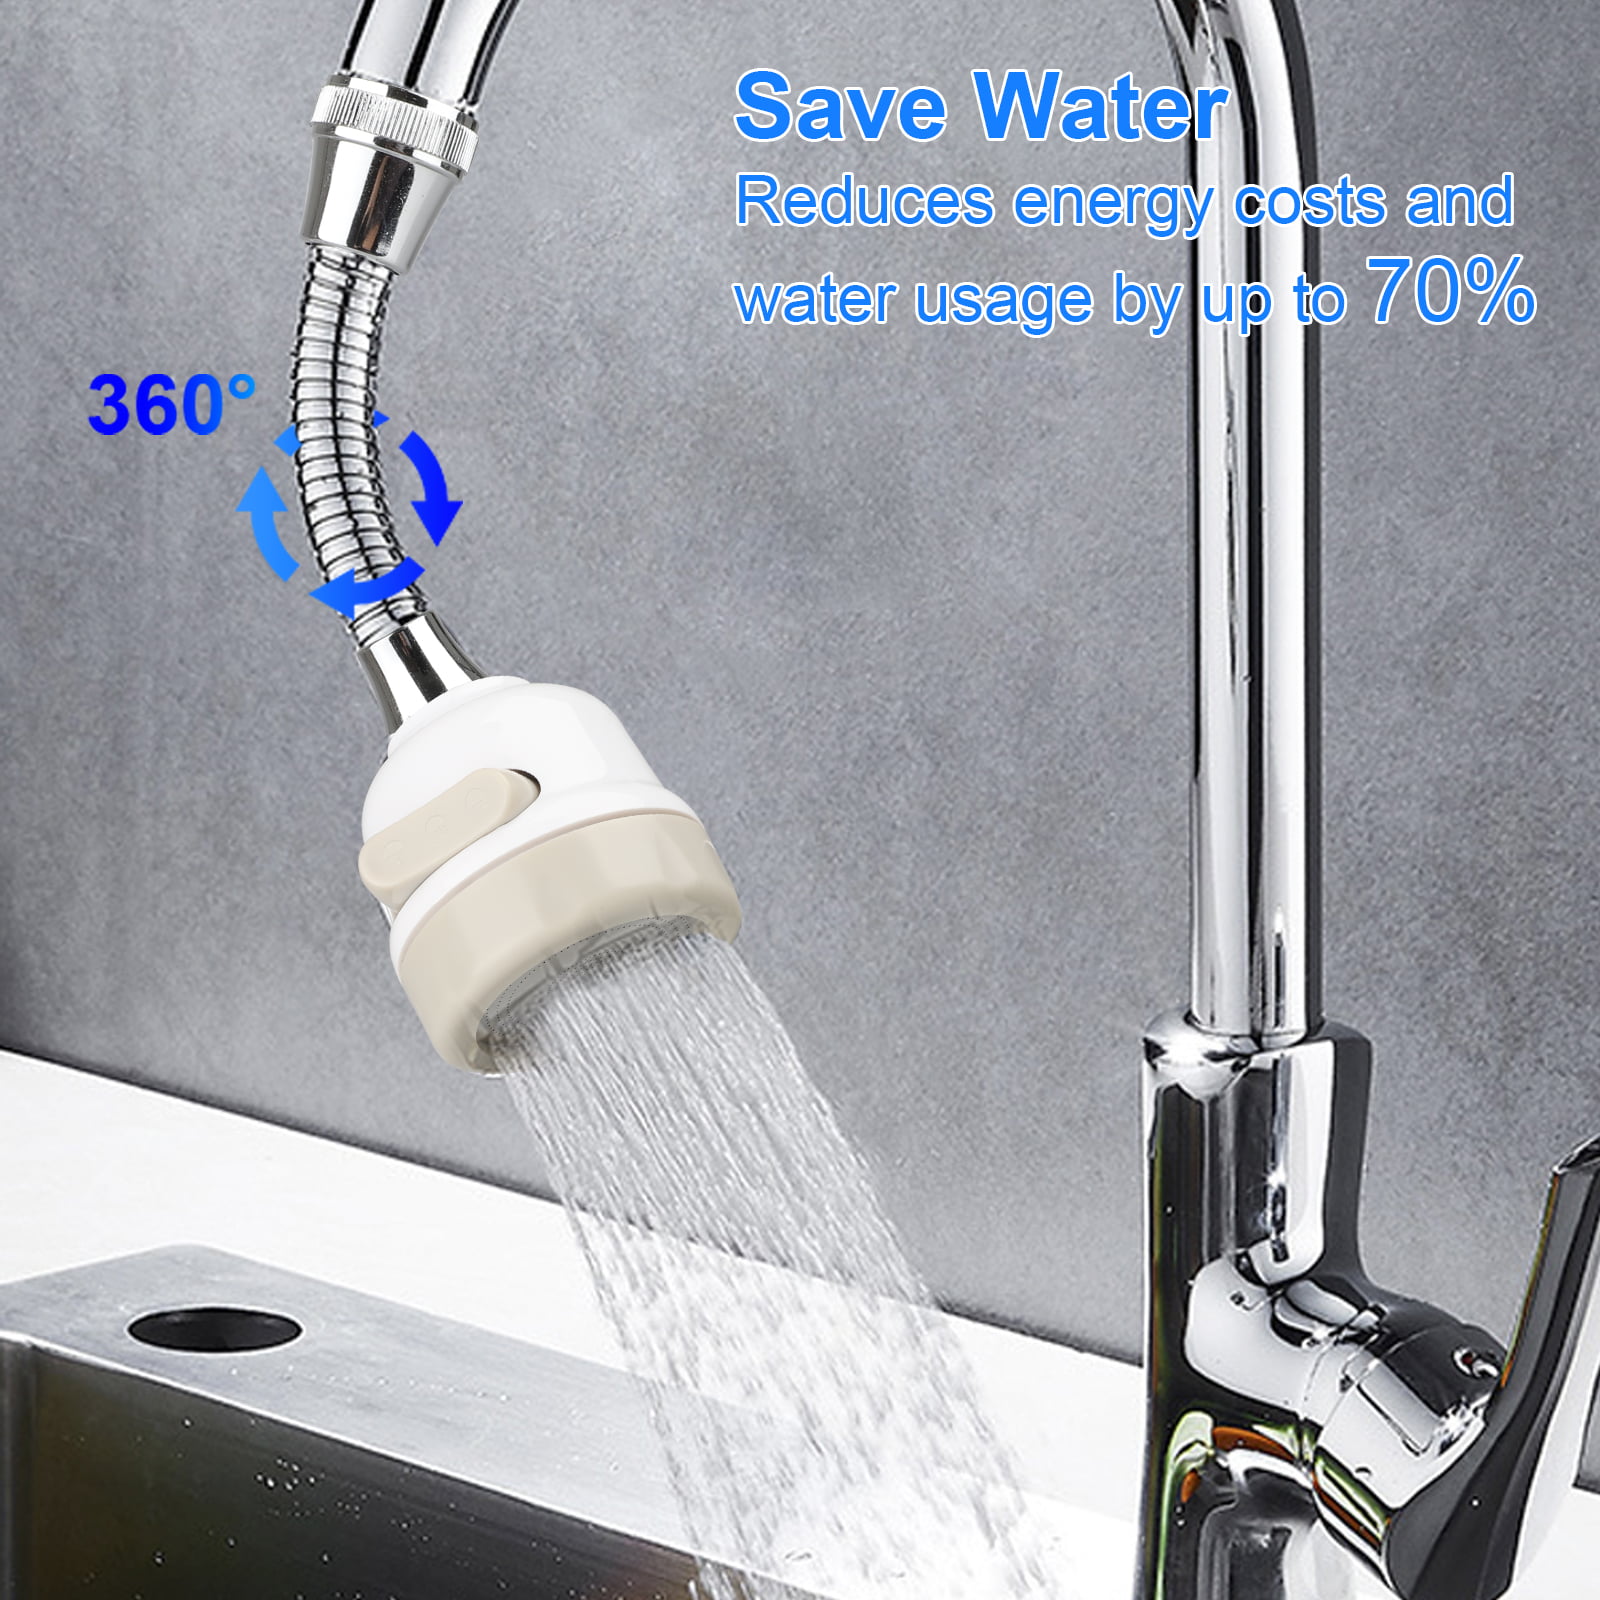 3 Modes Position Adjustable Sink Faucet Sprayer Head,High Water Flow Tap Water Head for Home Kitchen Bathroom,Booster Shower Water Saver Kitchen Water Faucet Filter